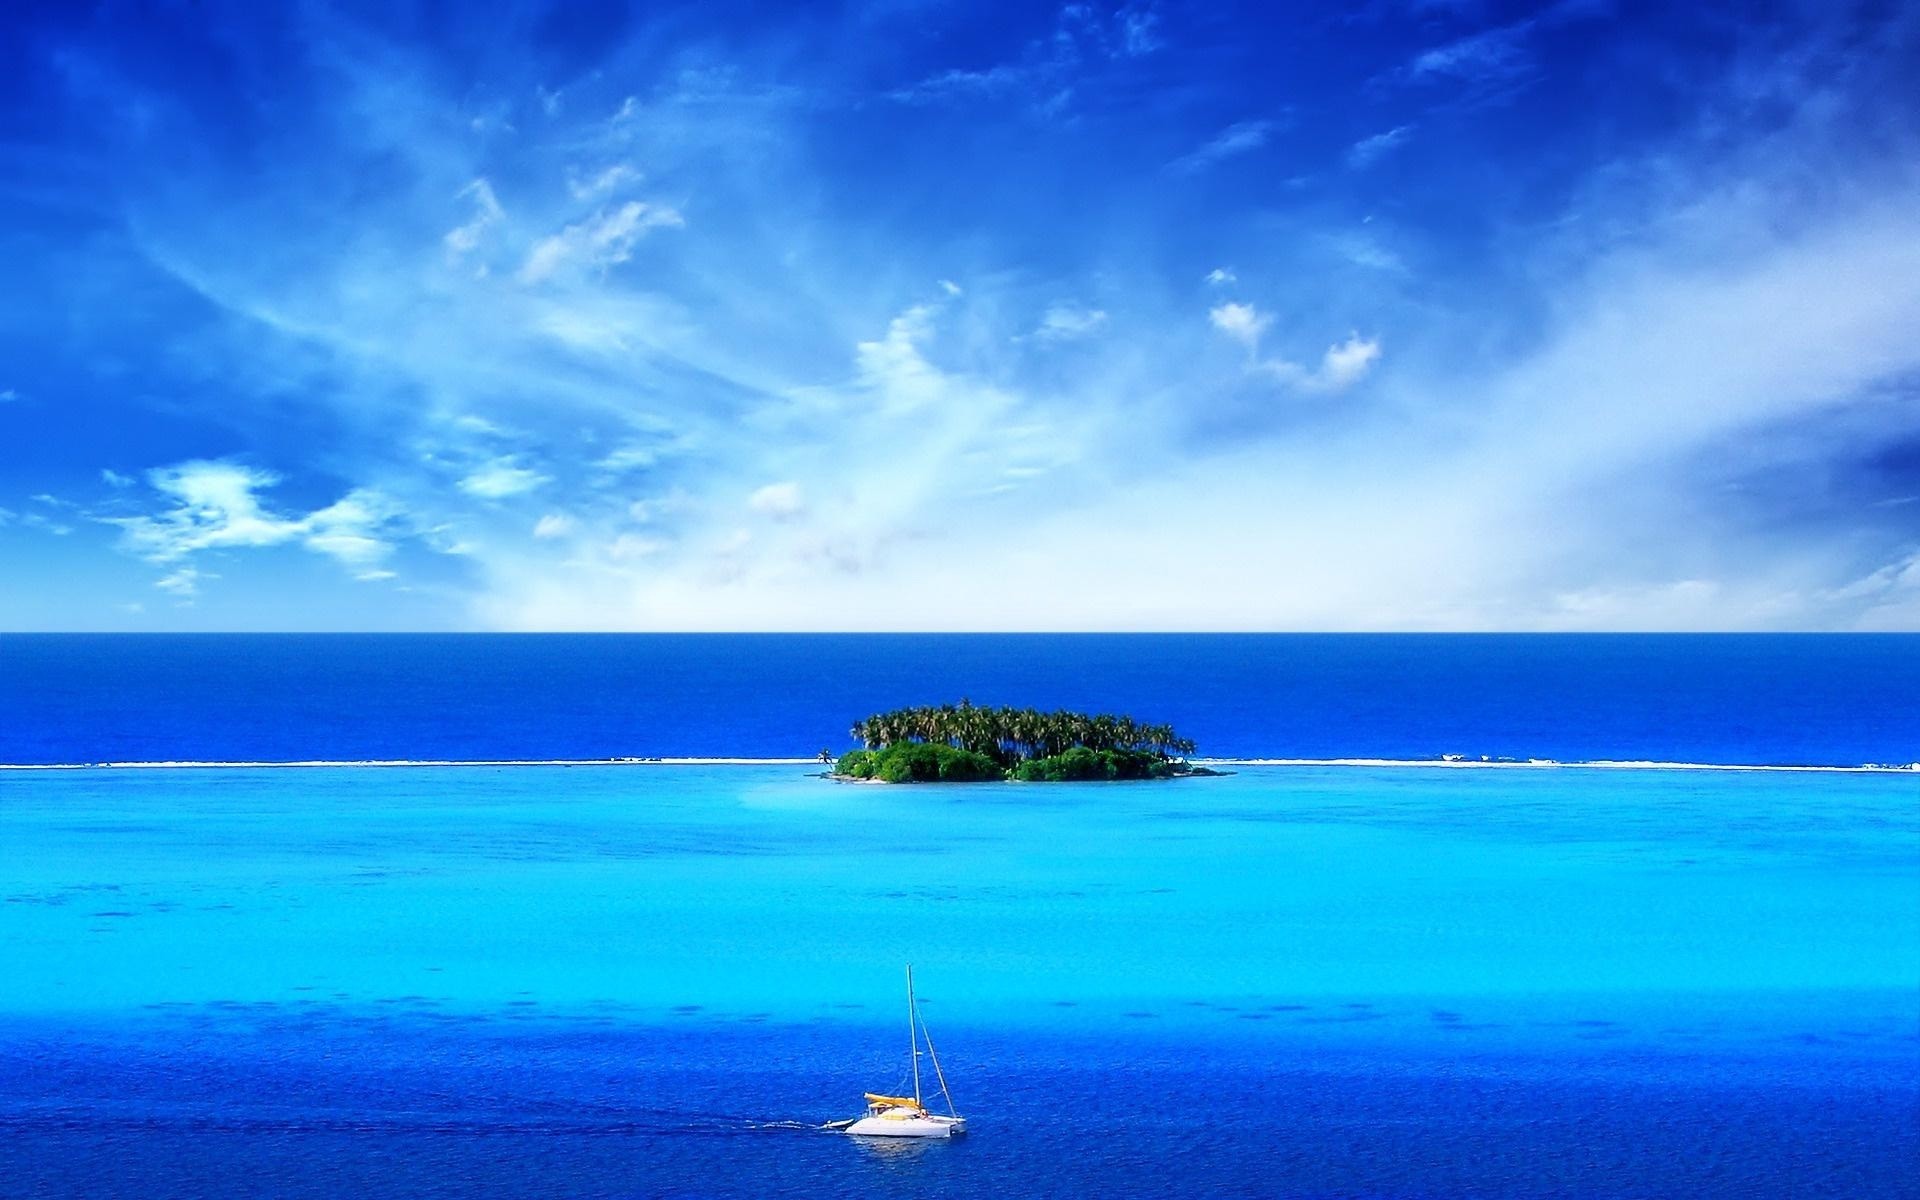 Sea And Blue Sky Fabulous Nature Wallpapers 
 Data - Blue Sky With Island - HD Wallpaper 